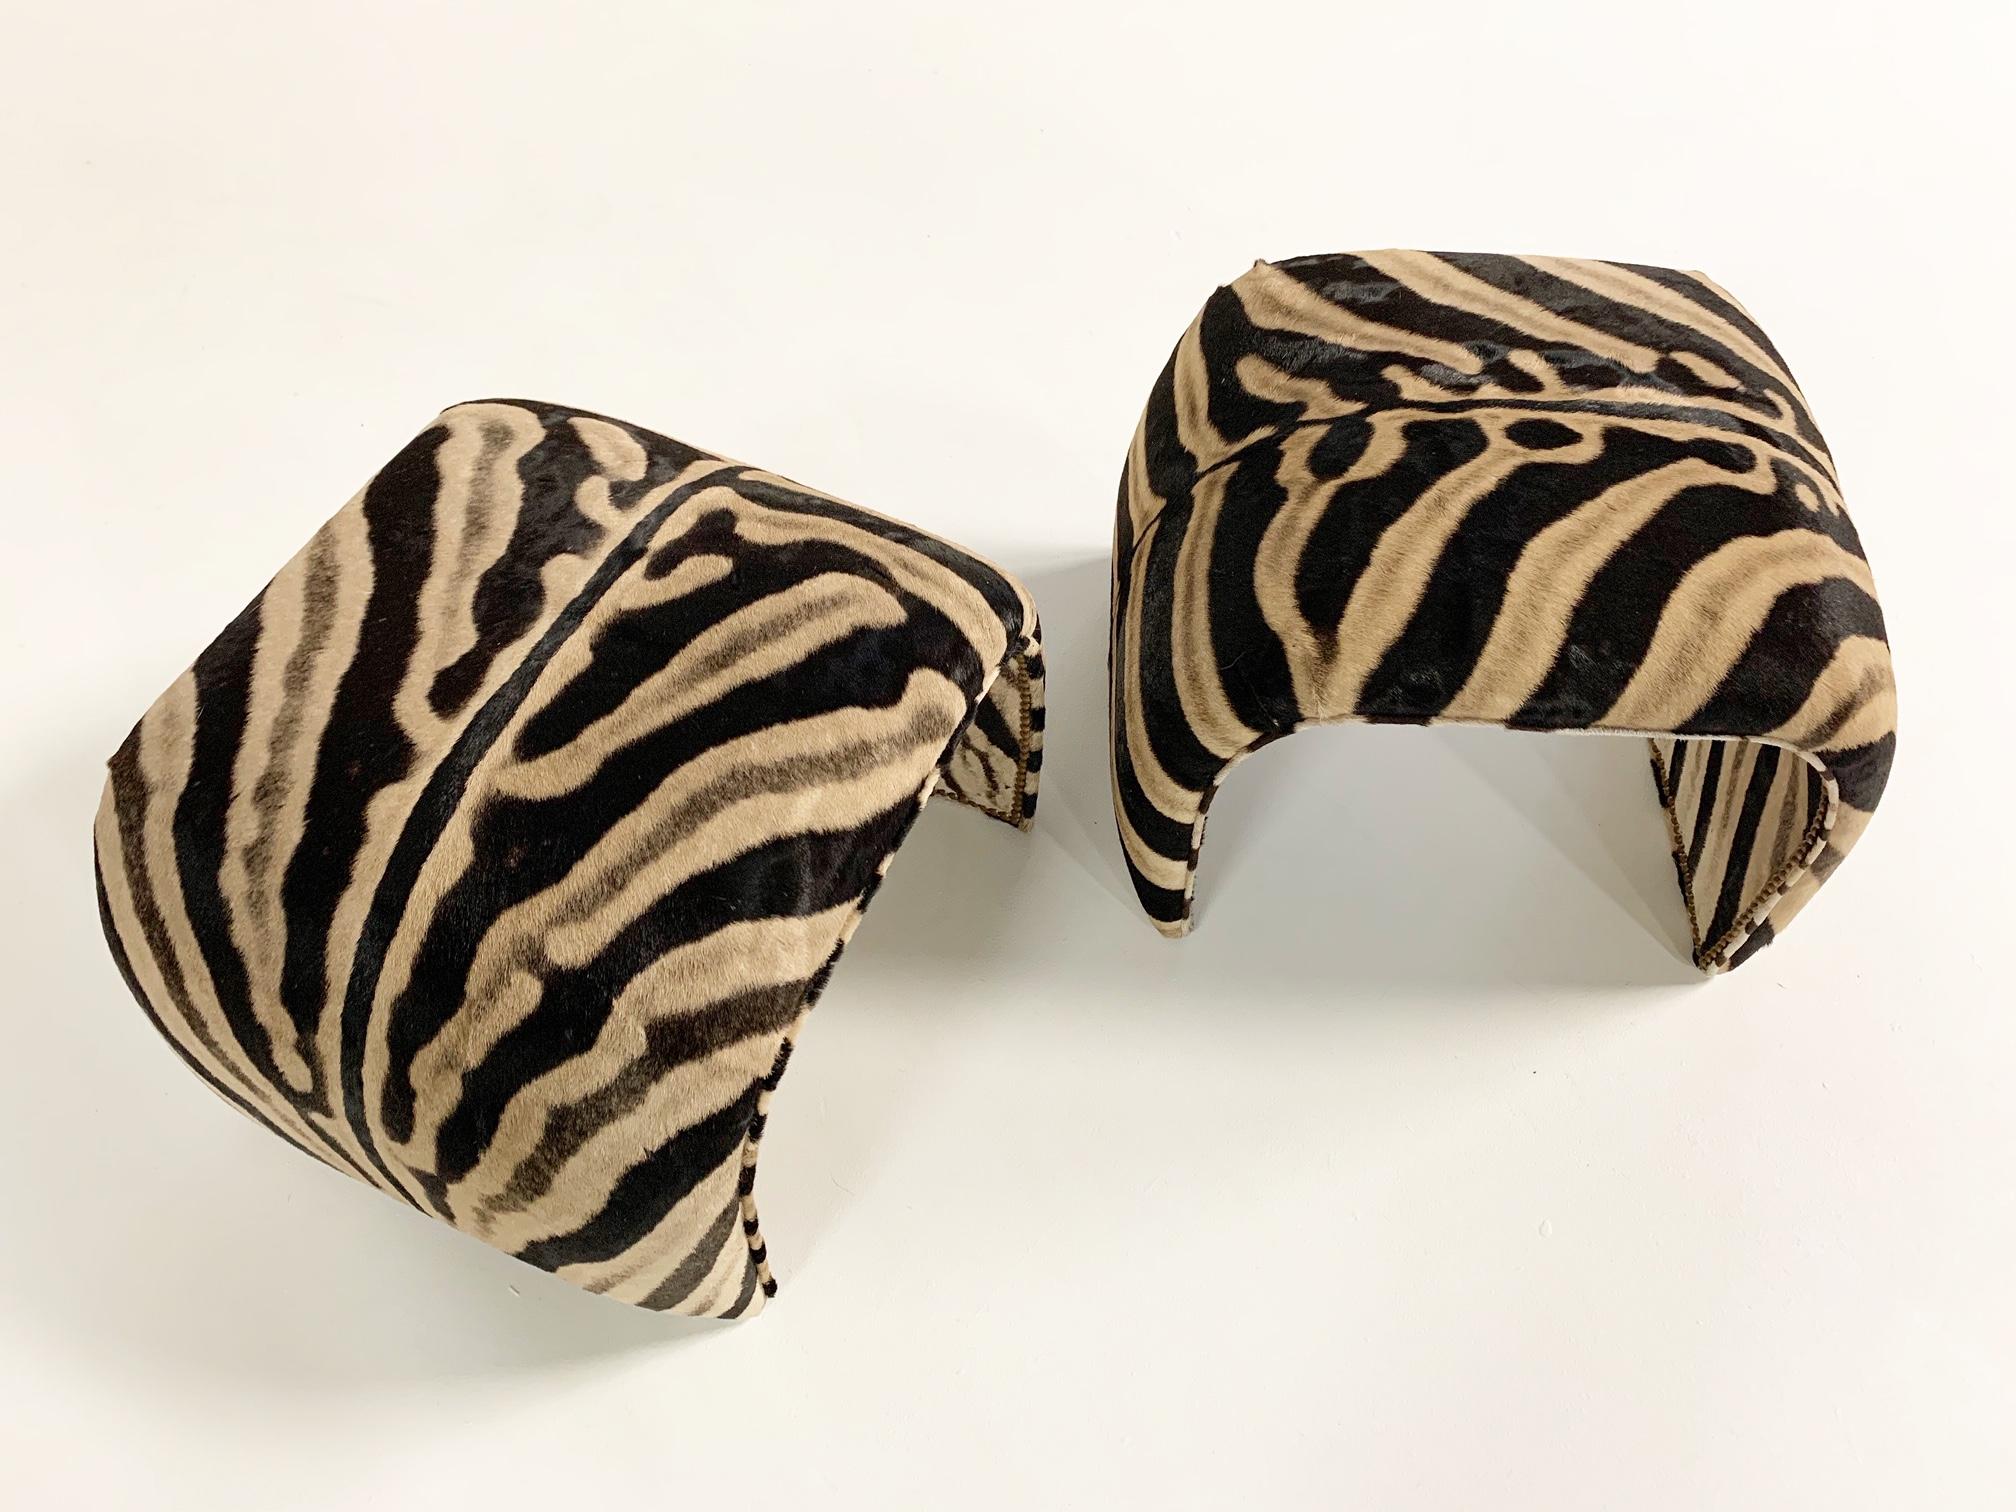 We collected these ottomans for their unique shape. The entire piece has been meticulously reupholstered in zebra hide. There is no seam on the top and brass nailheads finish the seam on the underside. They are beautiful and would look lovely in